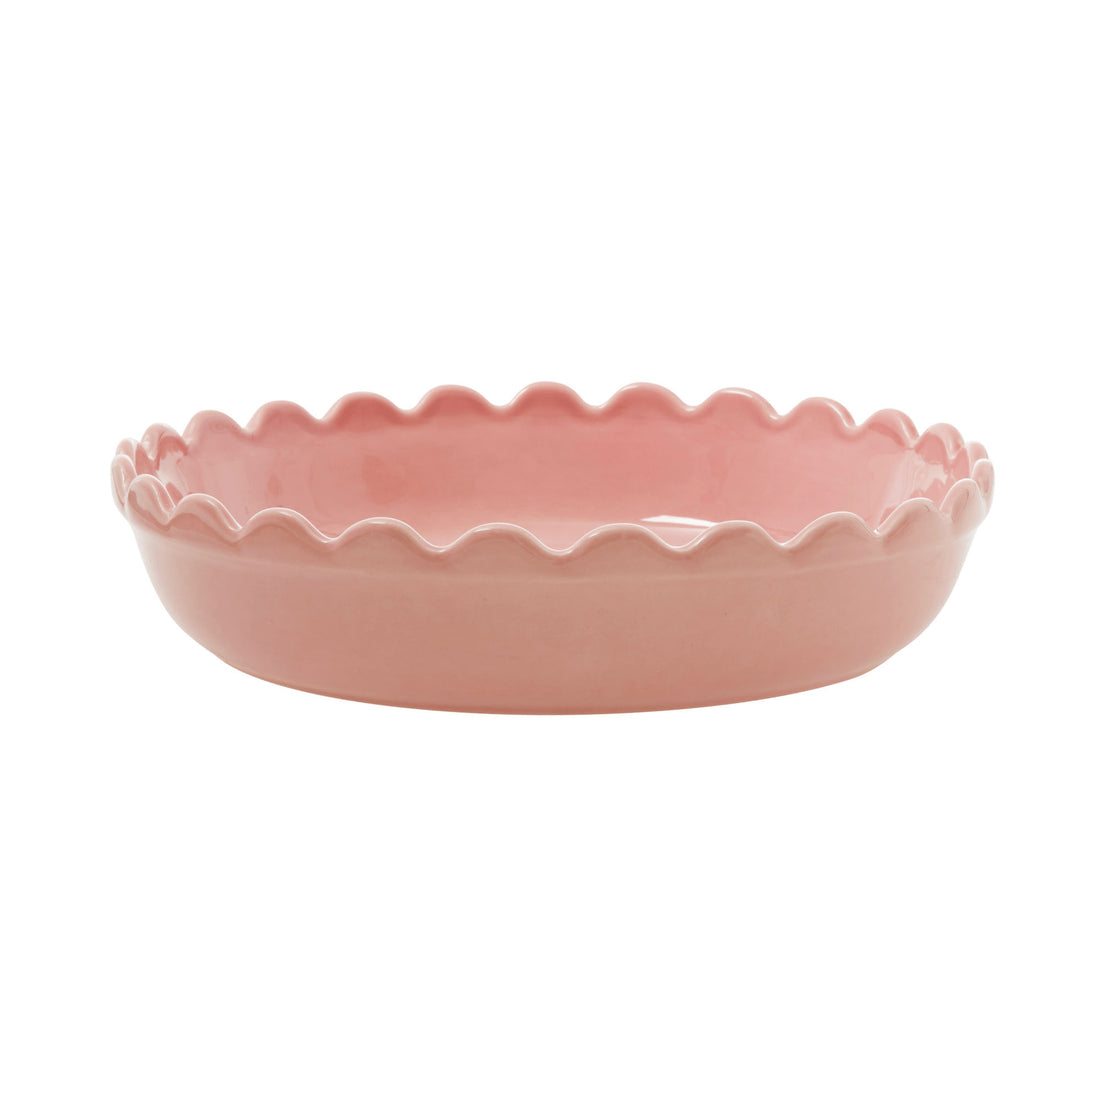 rice-dk-stoneware-pie-dish-in-soft-pink-small-rice-cepie-ssi-01